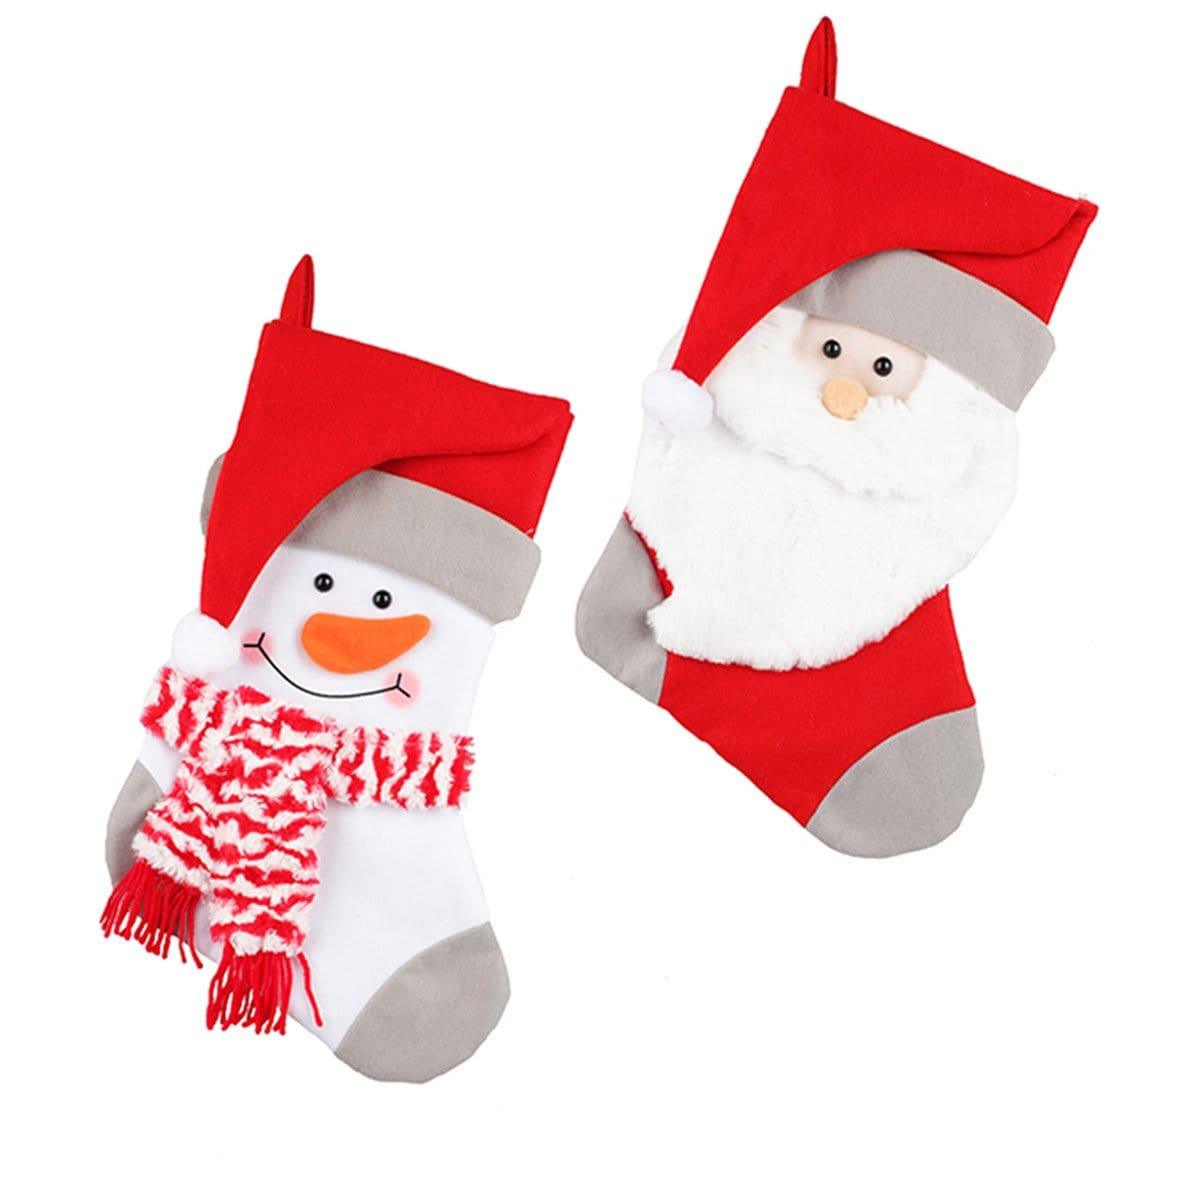 Buy Christmas Red & White Fabric Stocking, Assortment, 1 count sold at Party Expert